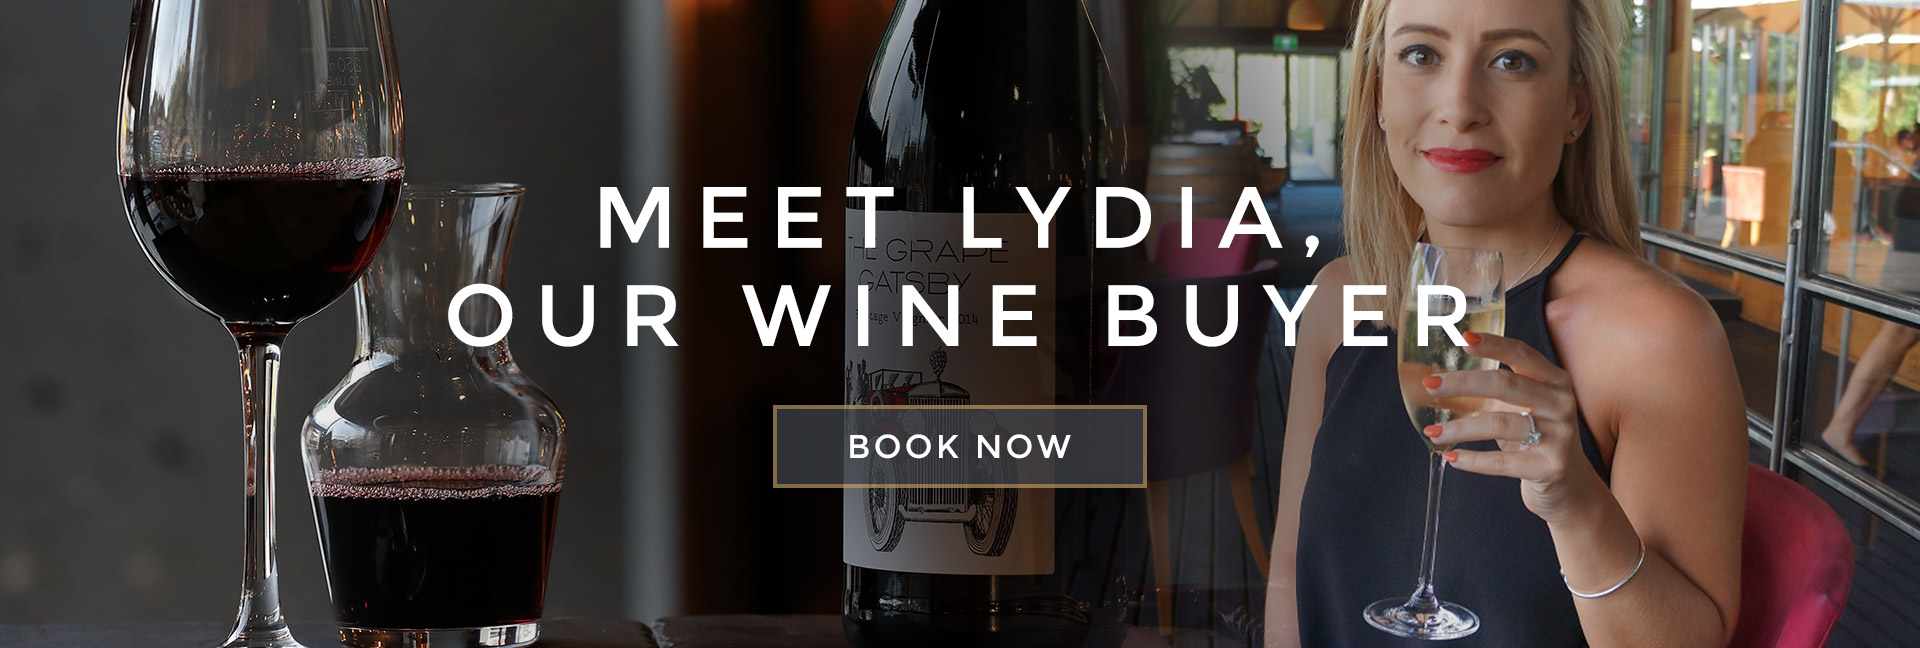 Meet Lydia, our wine buyer at All Bar One New Street Station